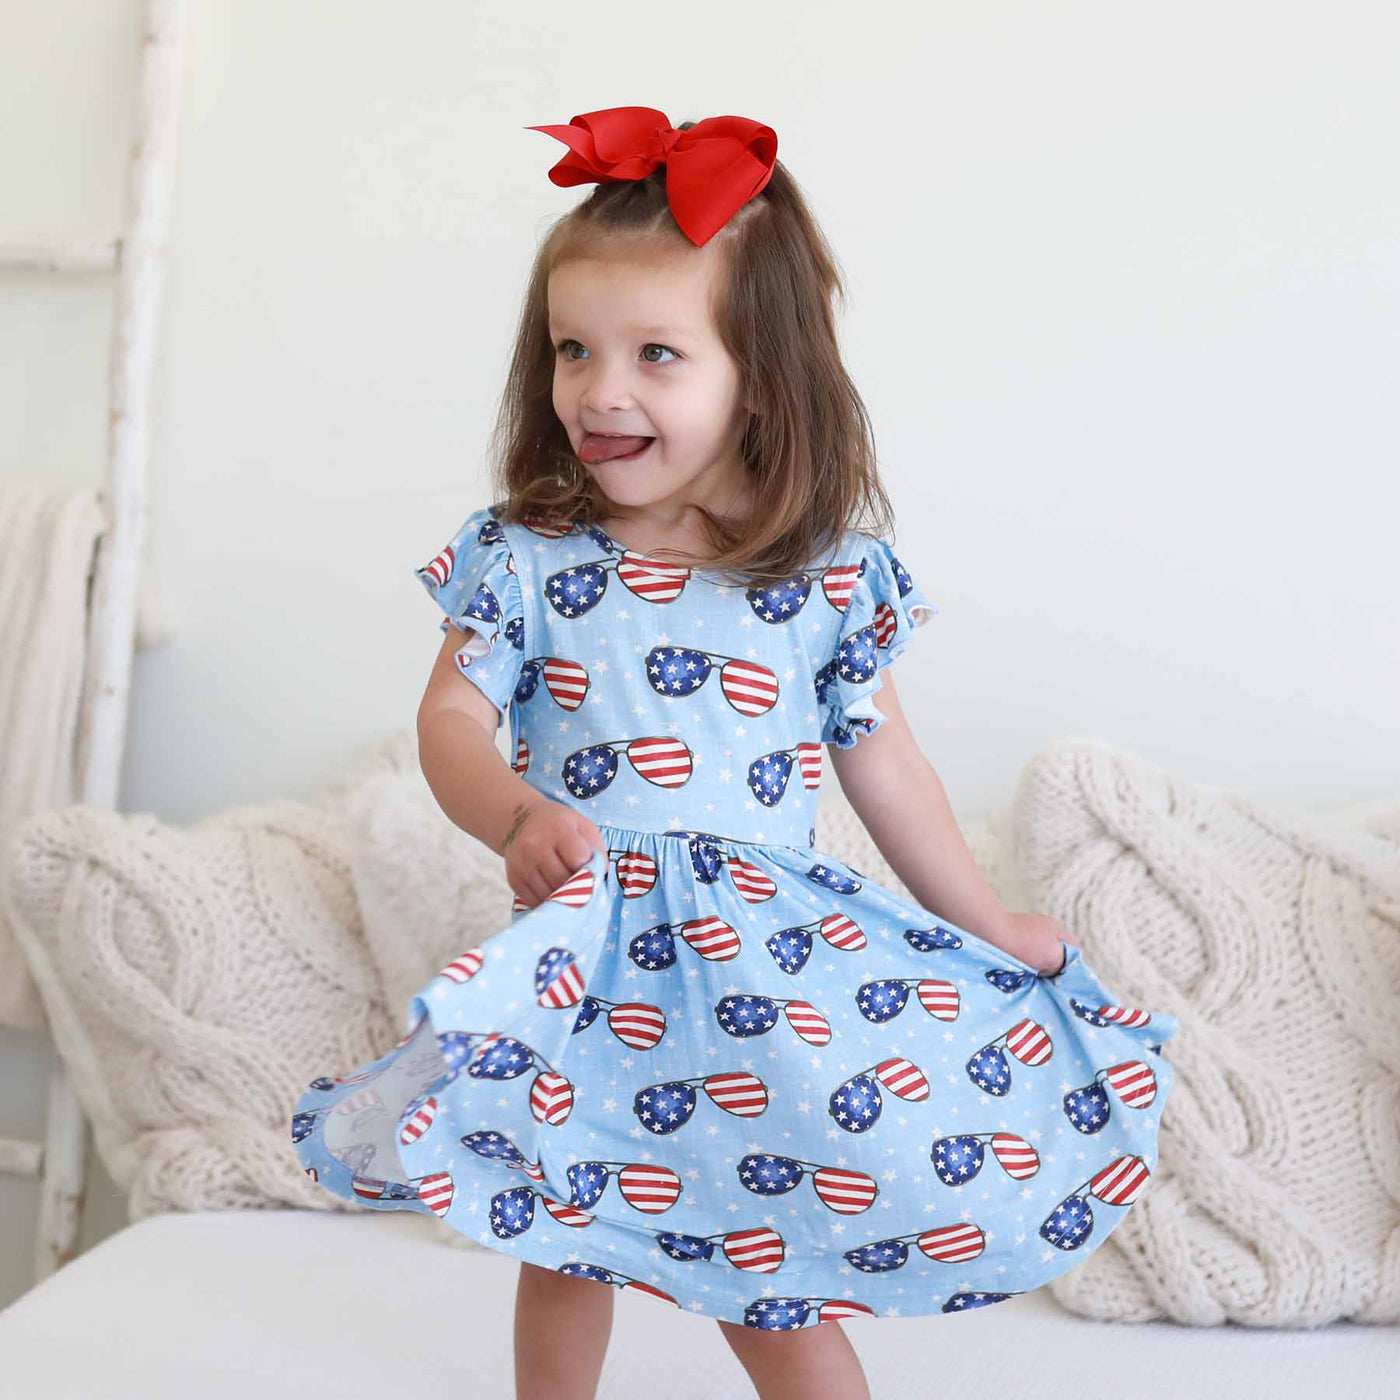 lightweight fourth of july dress for kids with flag sunglasses 